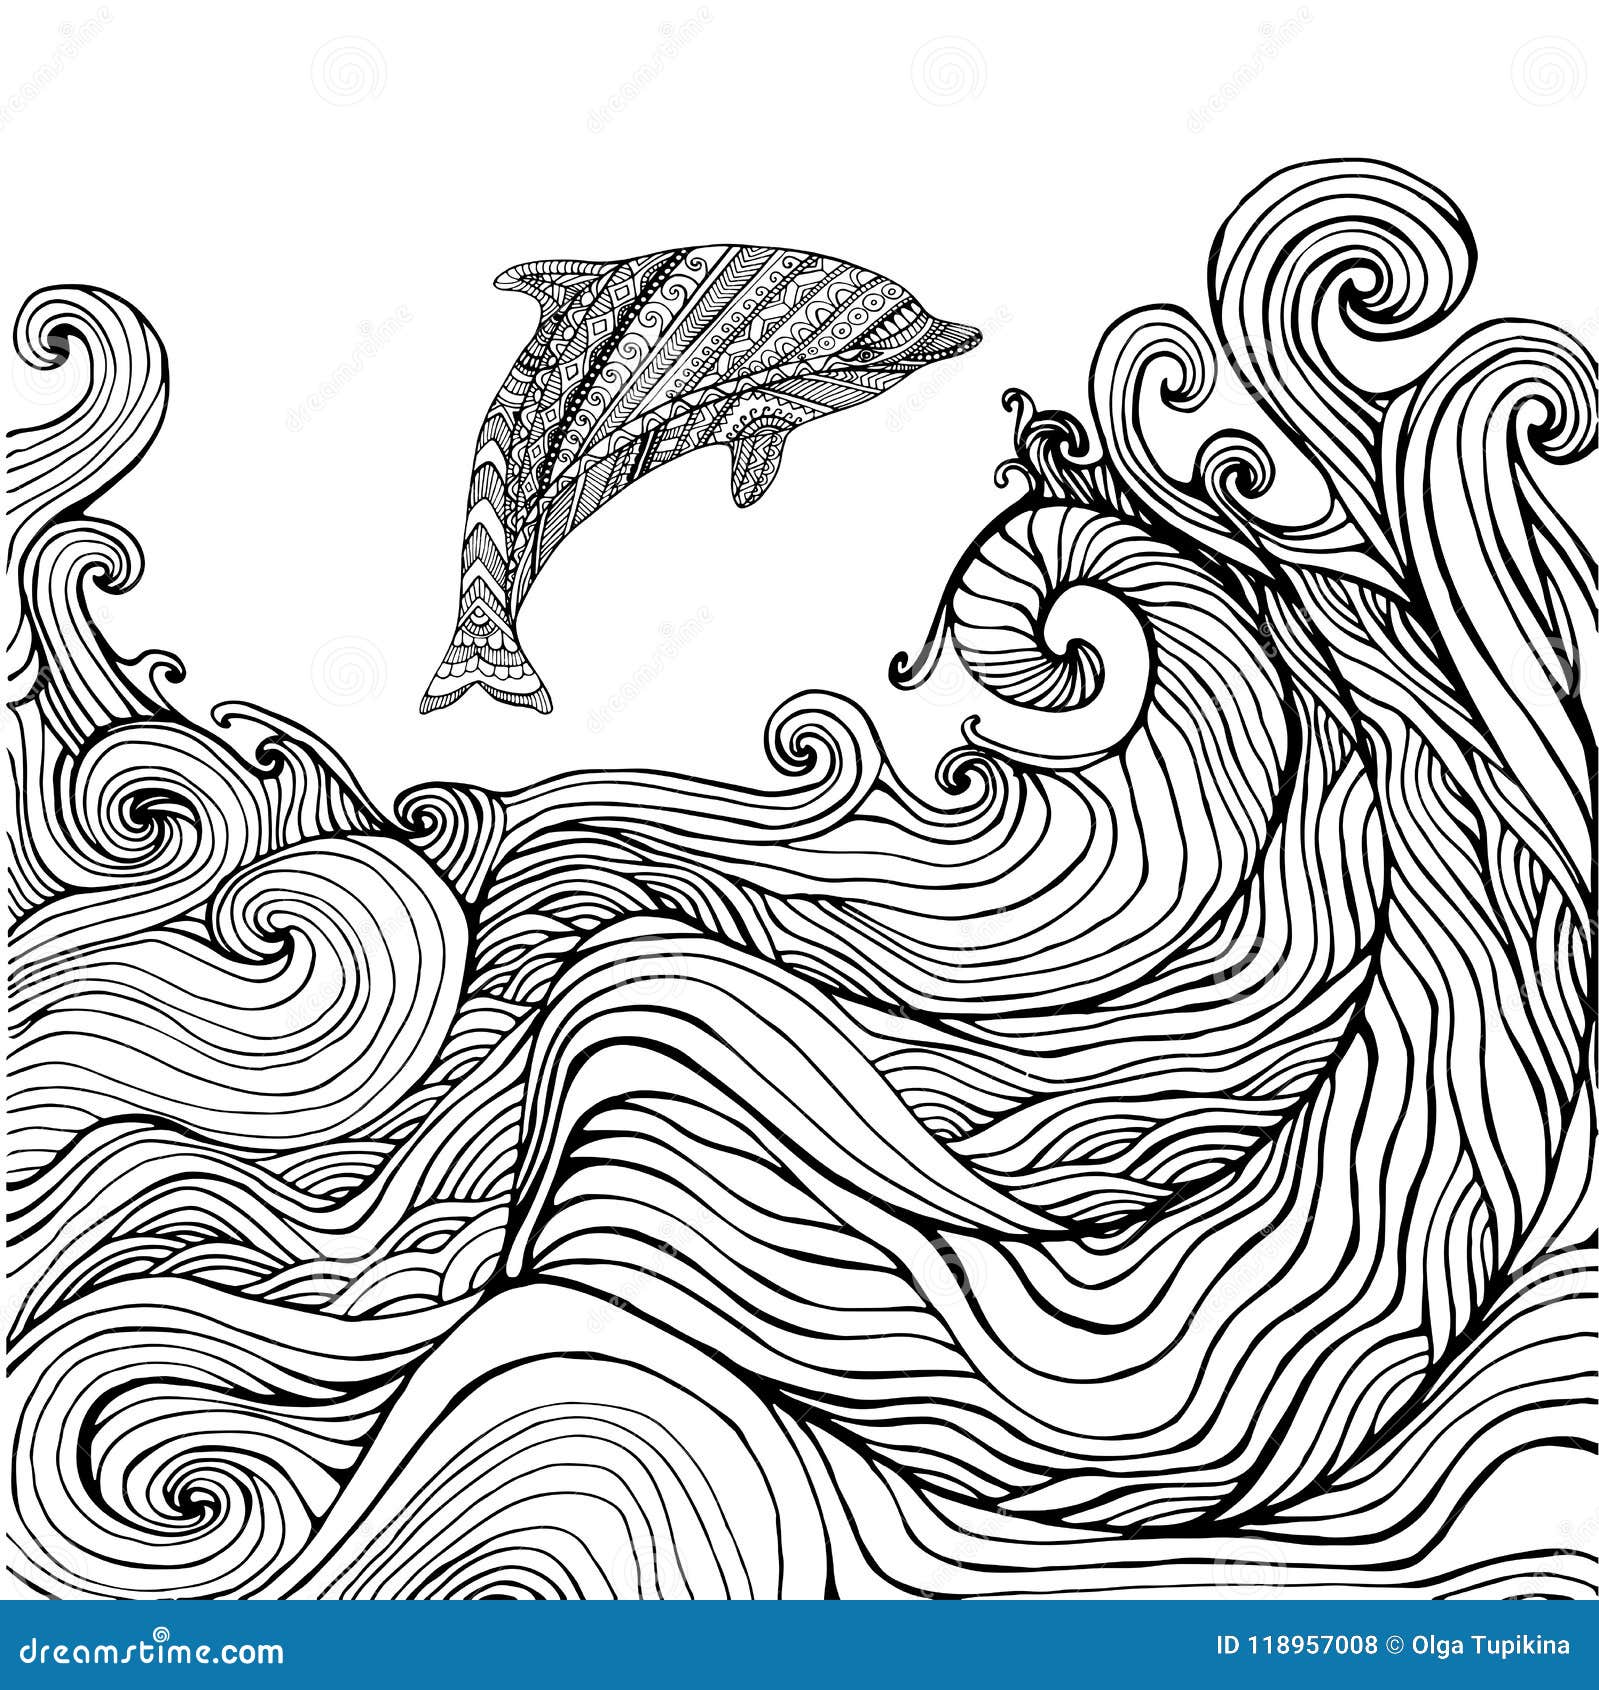 Dolphin And Ocean Waves Coloring Page For Children And 